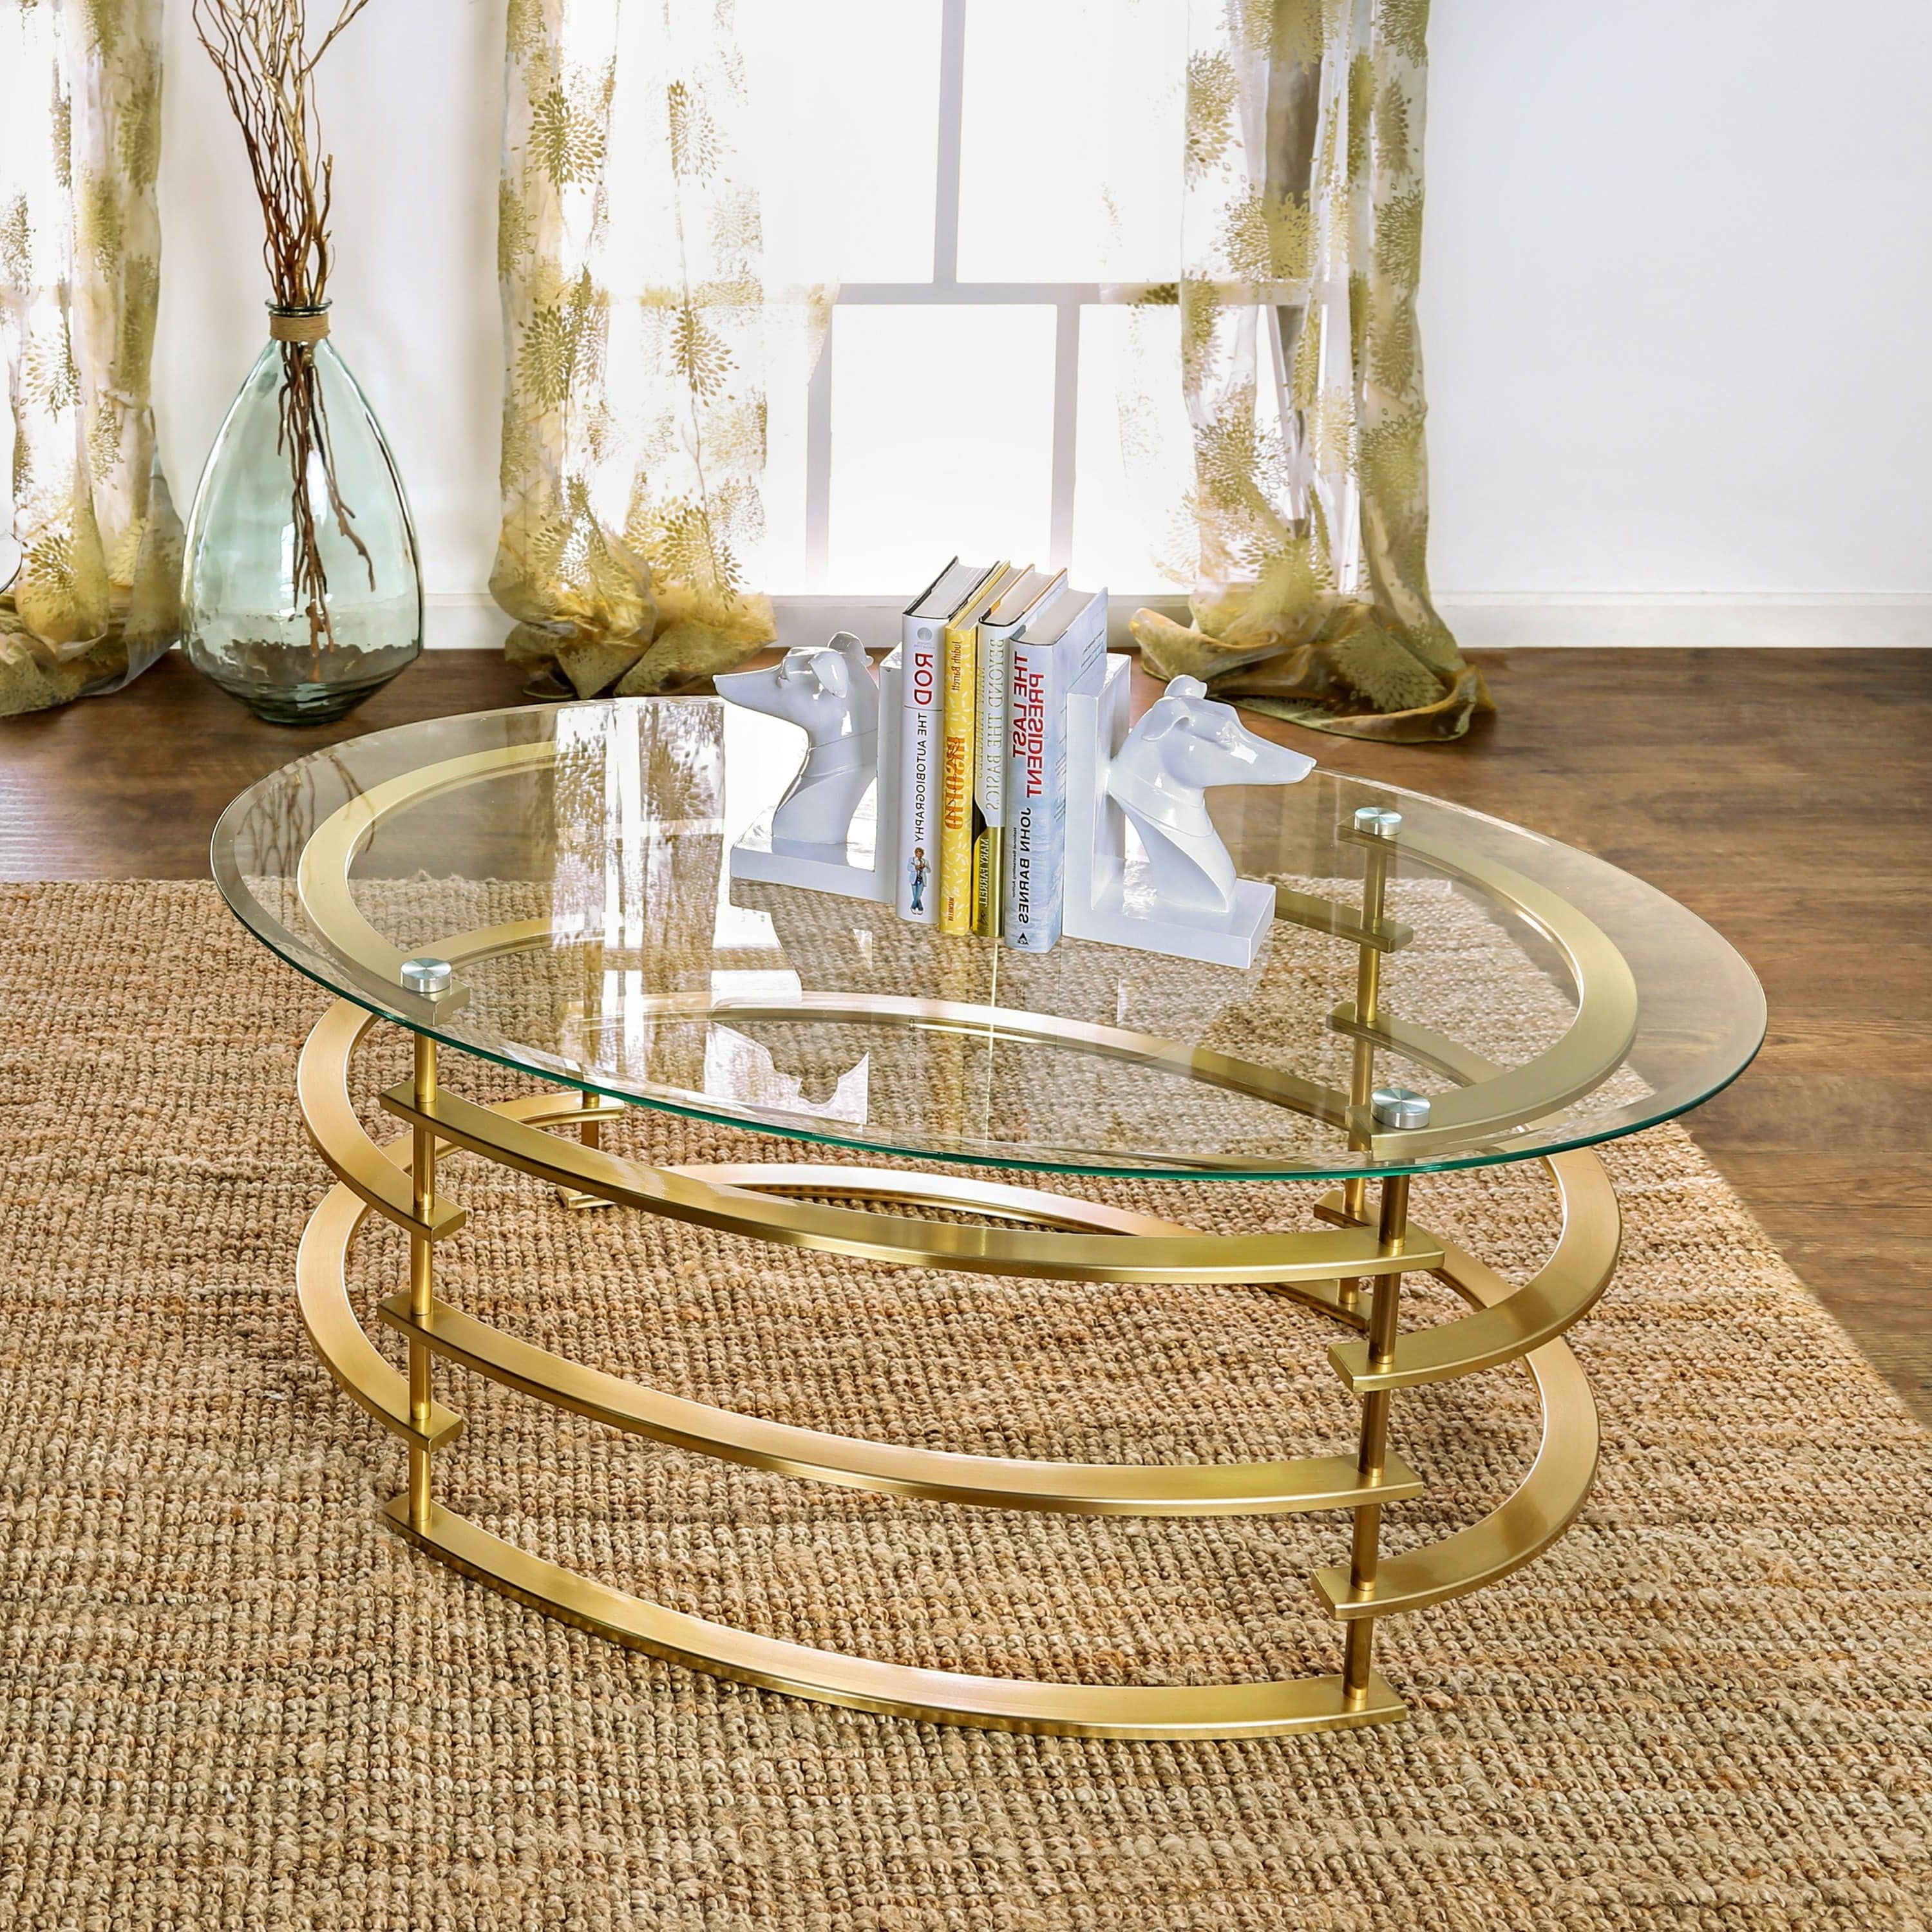 Most Current Silver Orchid Ipsen Contemporary Glass Top Coffee Tables Throughout Silver Orchid Marcello Contemporary Glass Top Coffee Table (View 15 of 20)